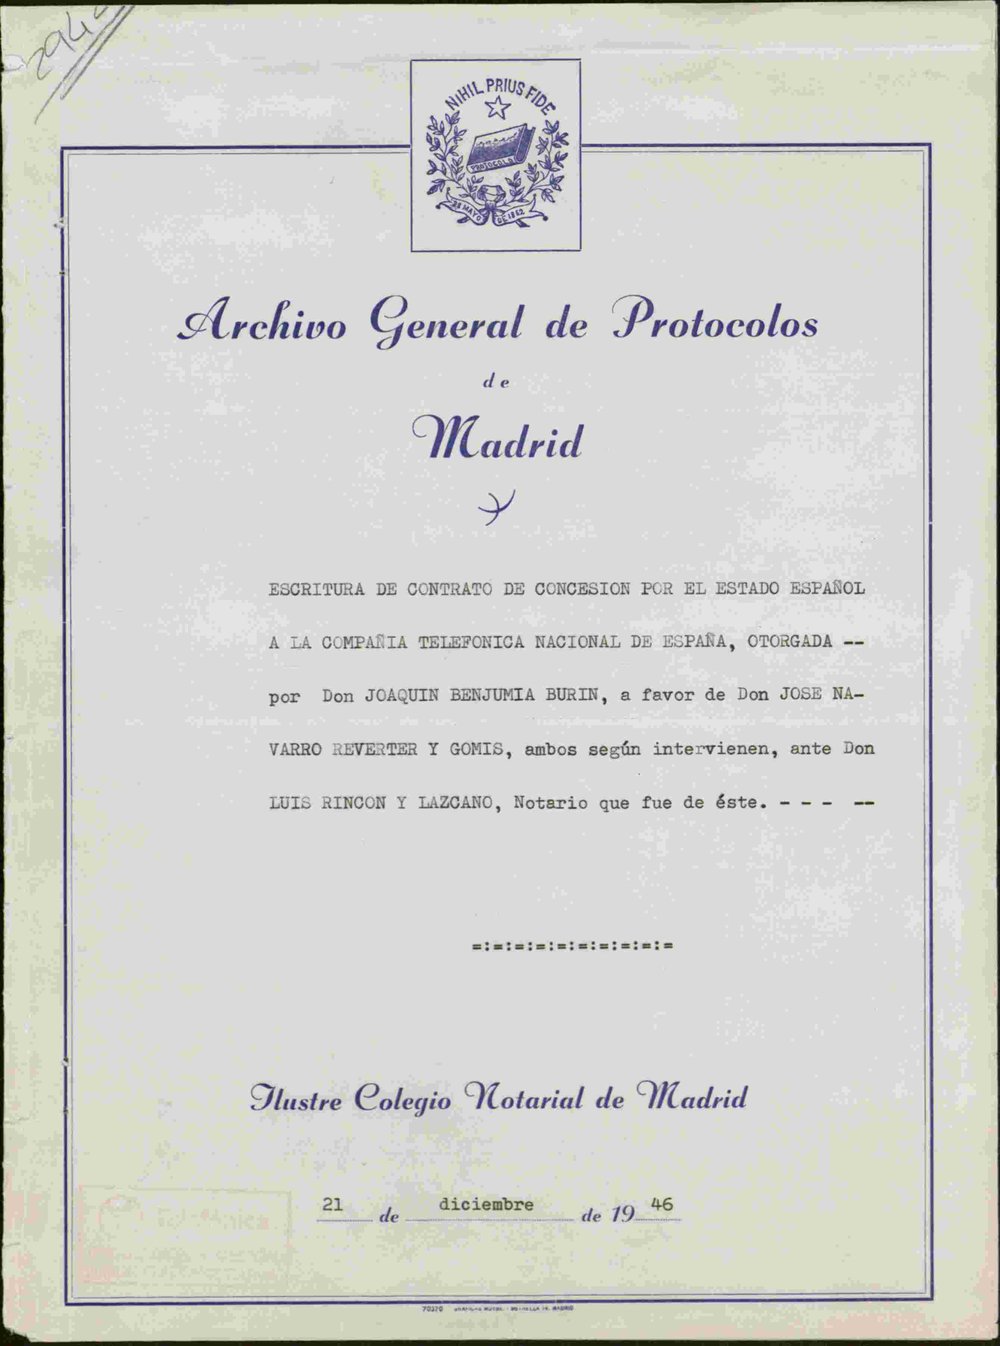 DEED OF CONCESSION CONTRACT BY THE SPANISH STATE TO THE NATIONAL TELEPHONE COMPANY OF SPAIN